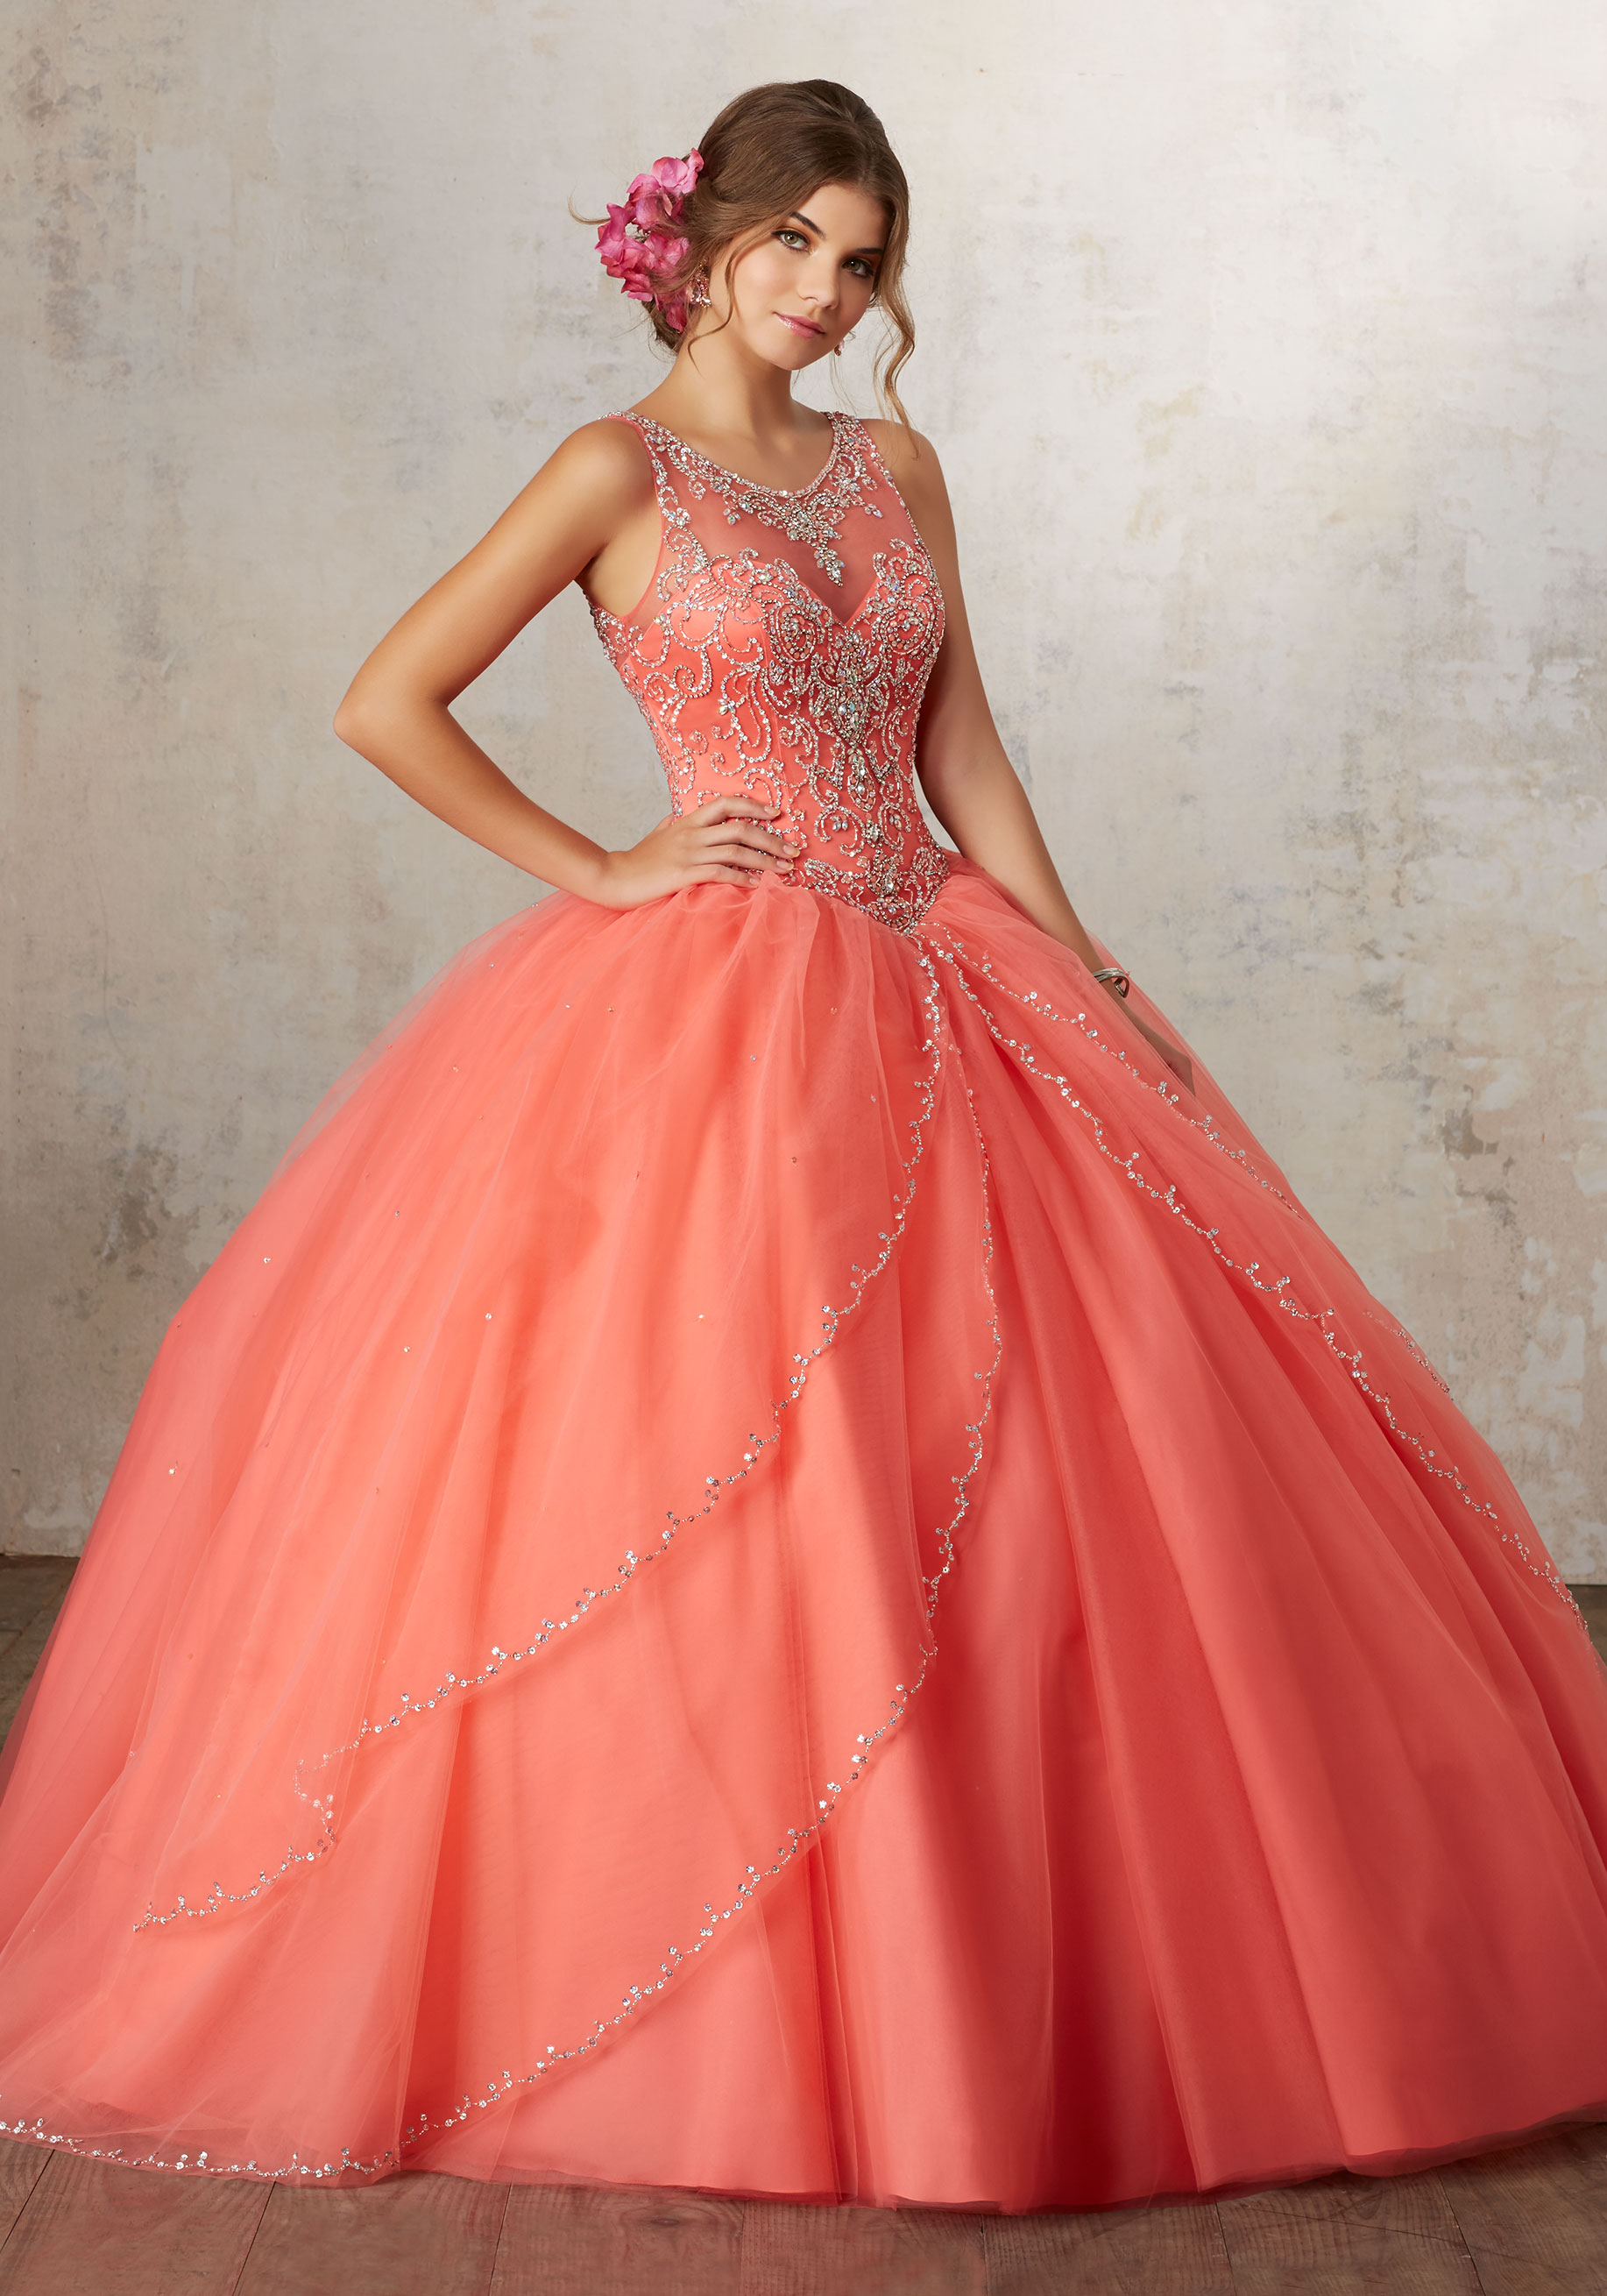 A woman in a coral Quinceañera dress posing for a picture in a ball gown